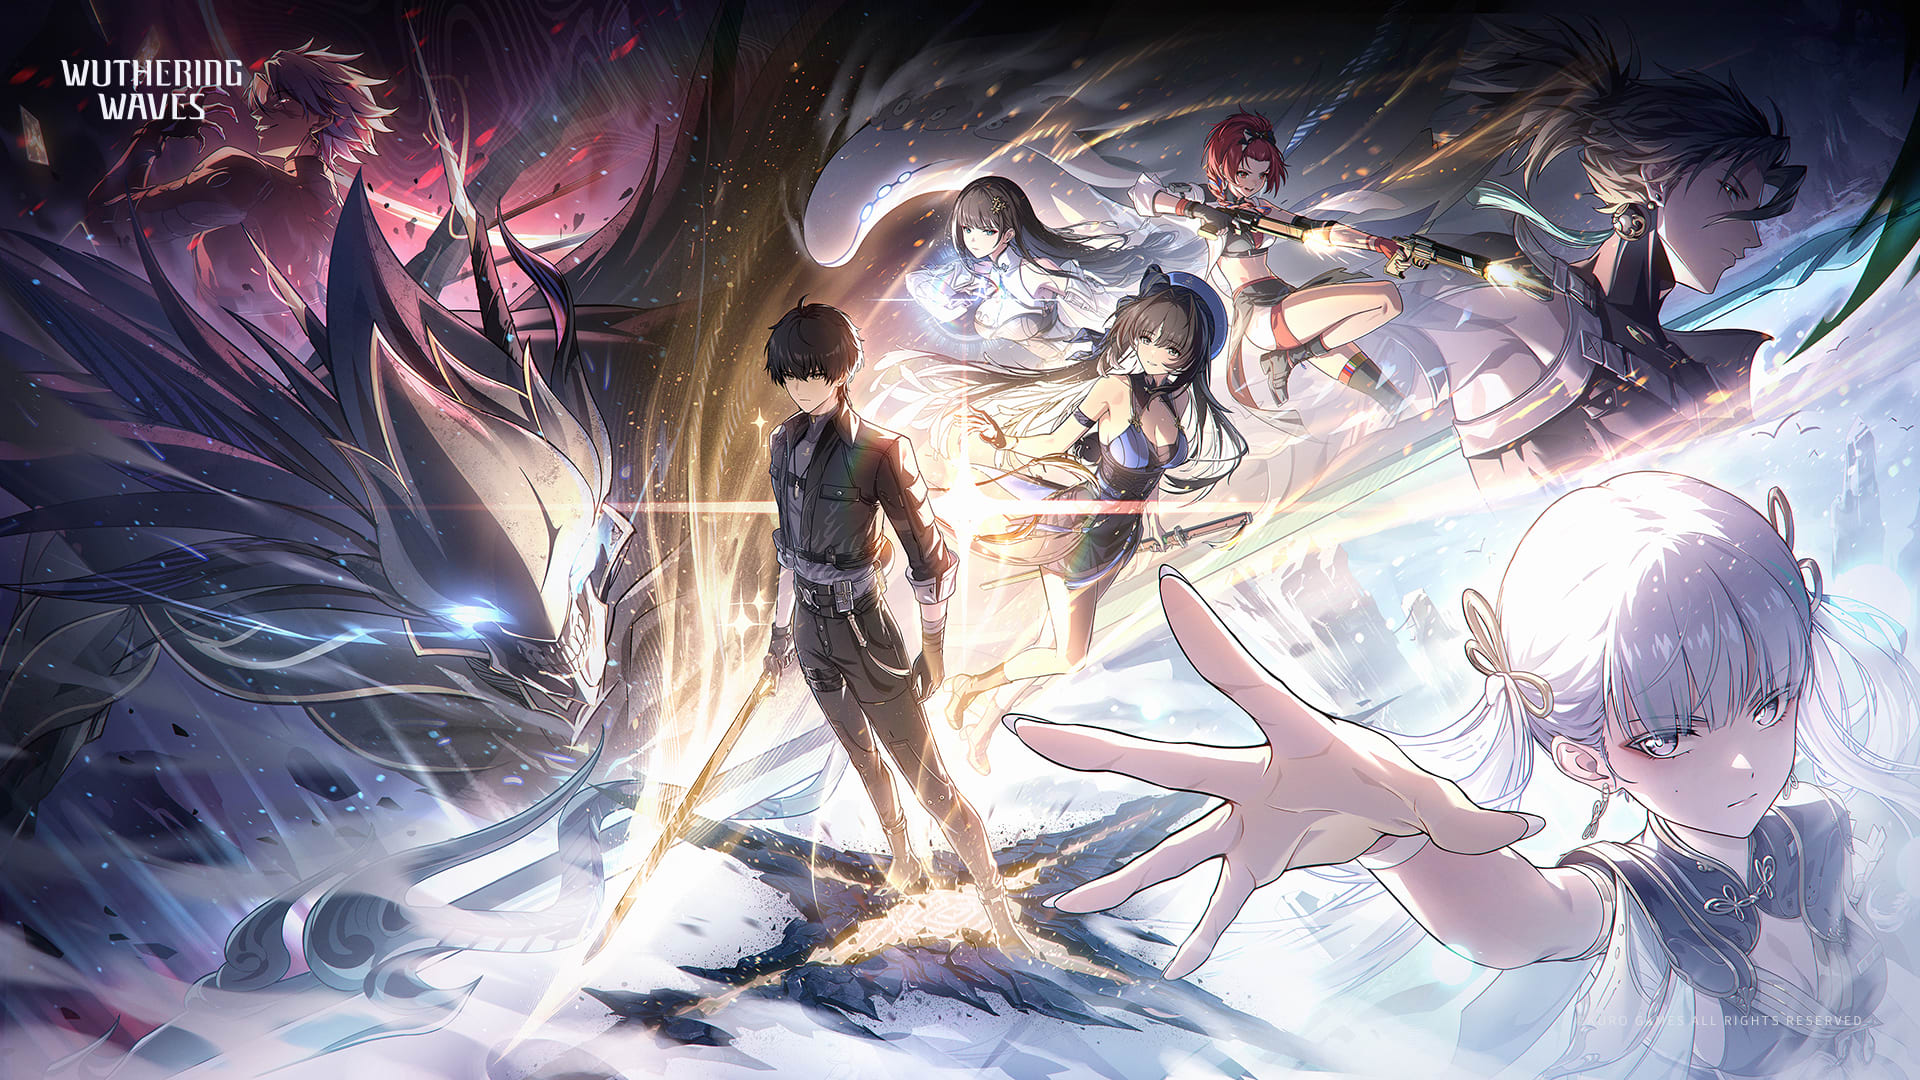 Wuthering Waves artwork showing several anime-style characters.